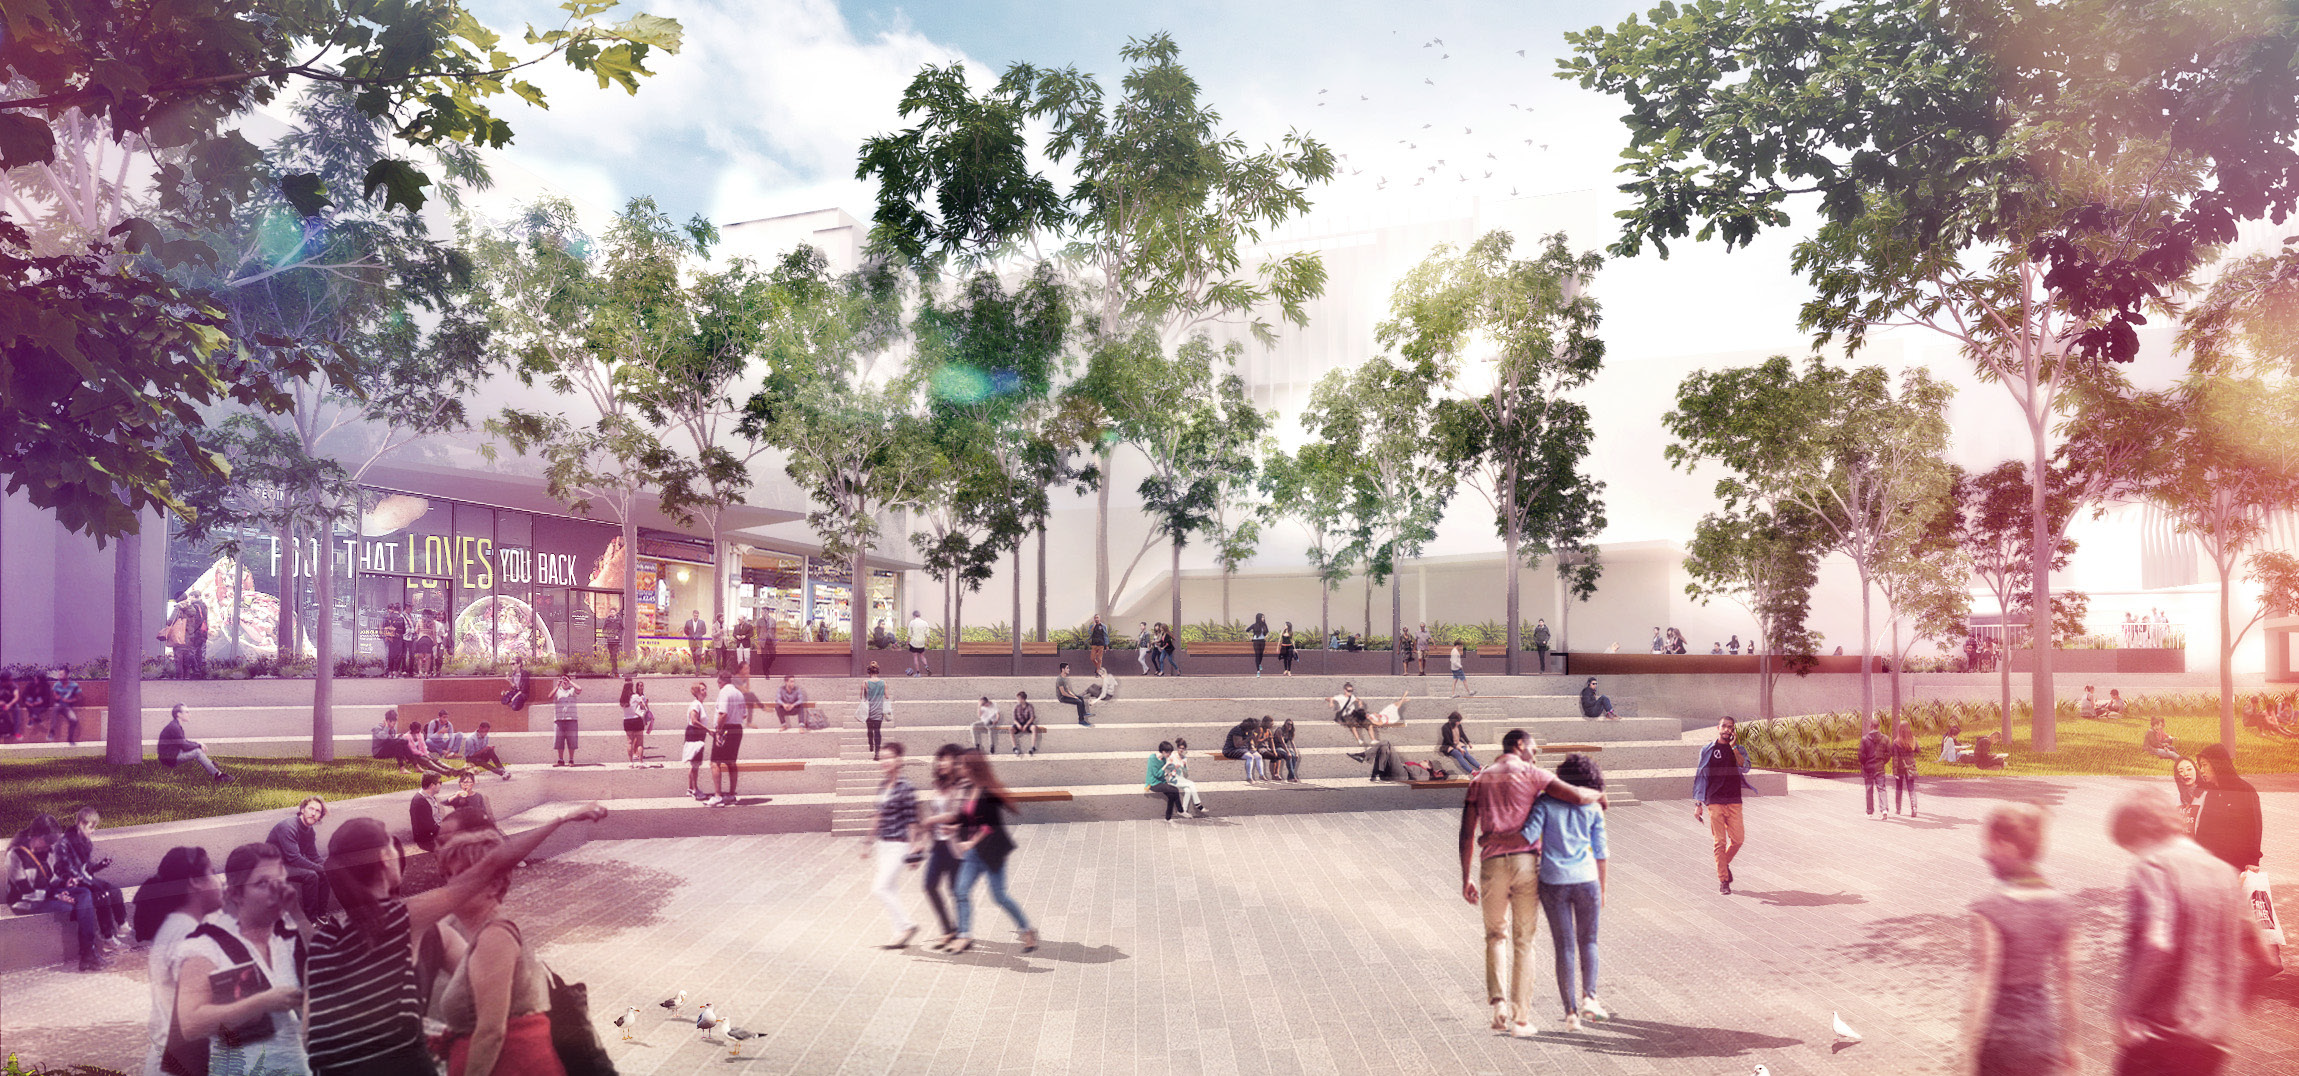 Concept design rendering showing landscape accross amitheatre looking towards the new Student Pavilion Building